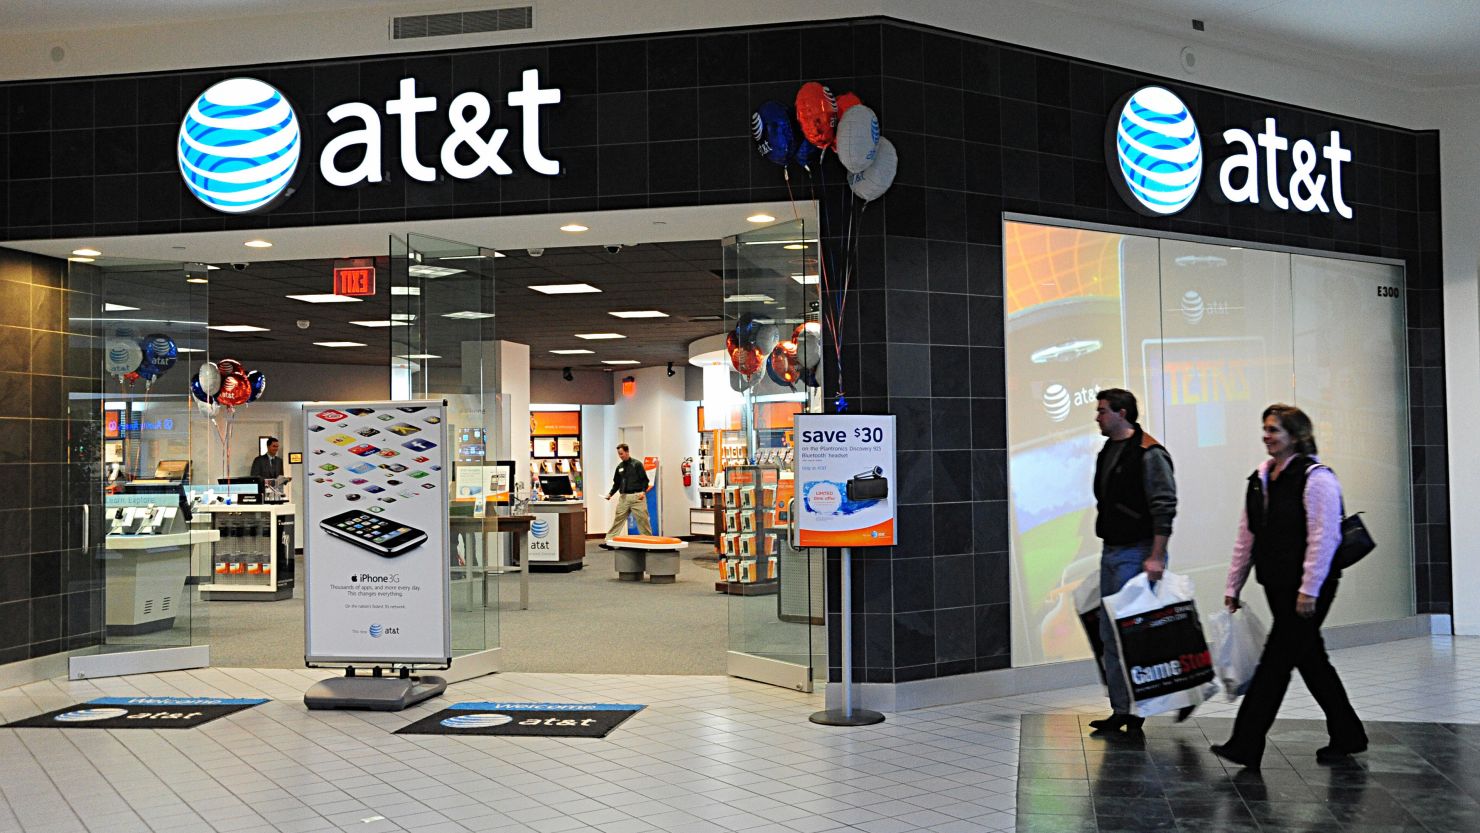 U.S. cellular giant AT&T Mobility is upgrading its wireless data network.